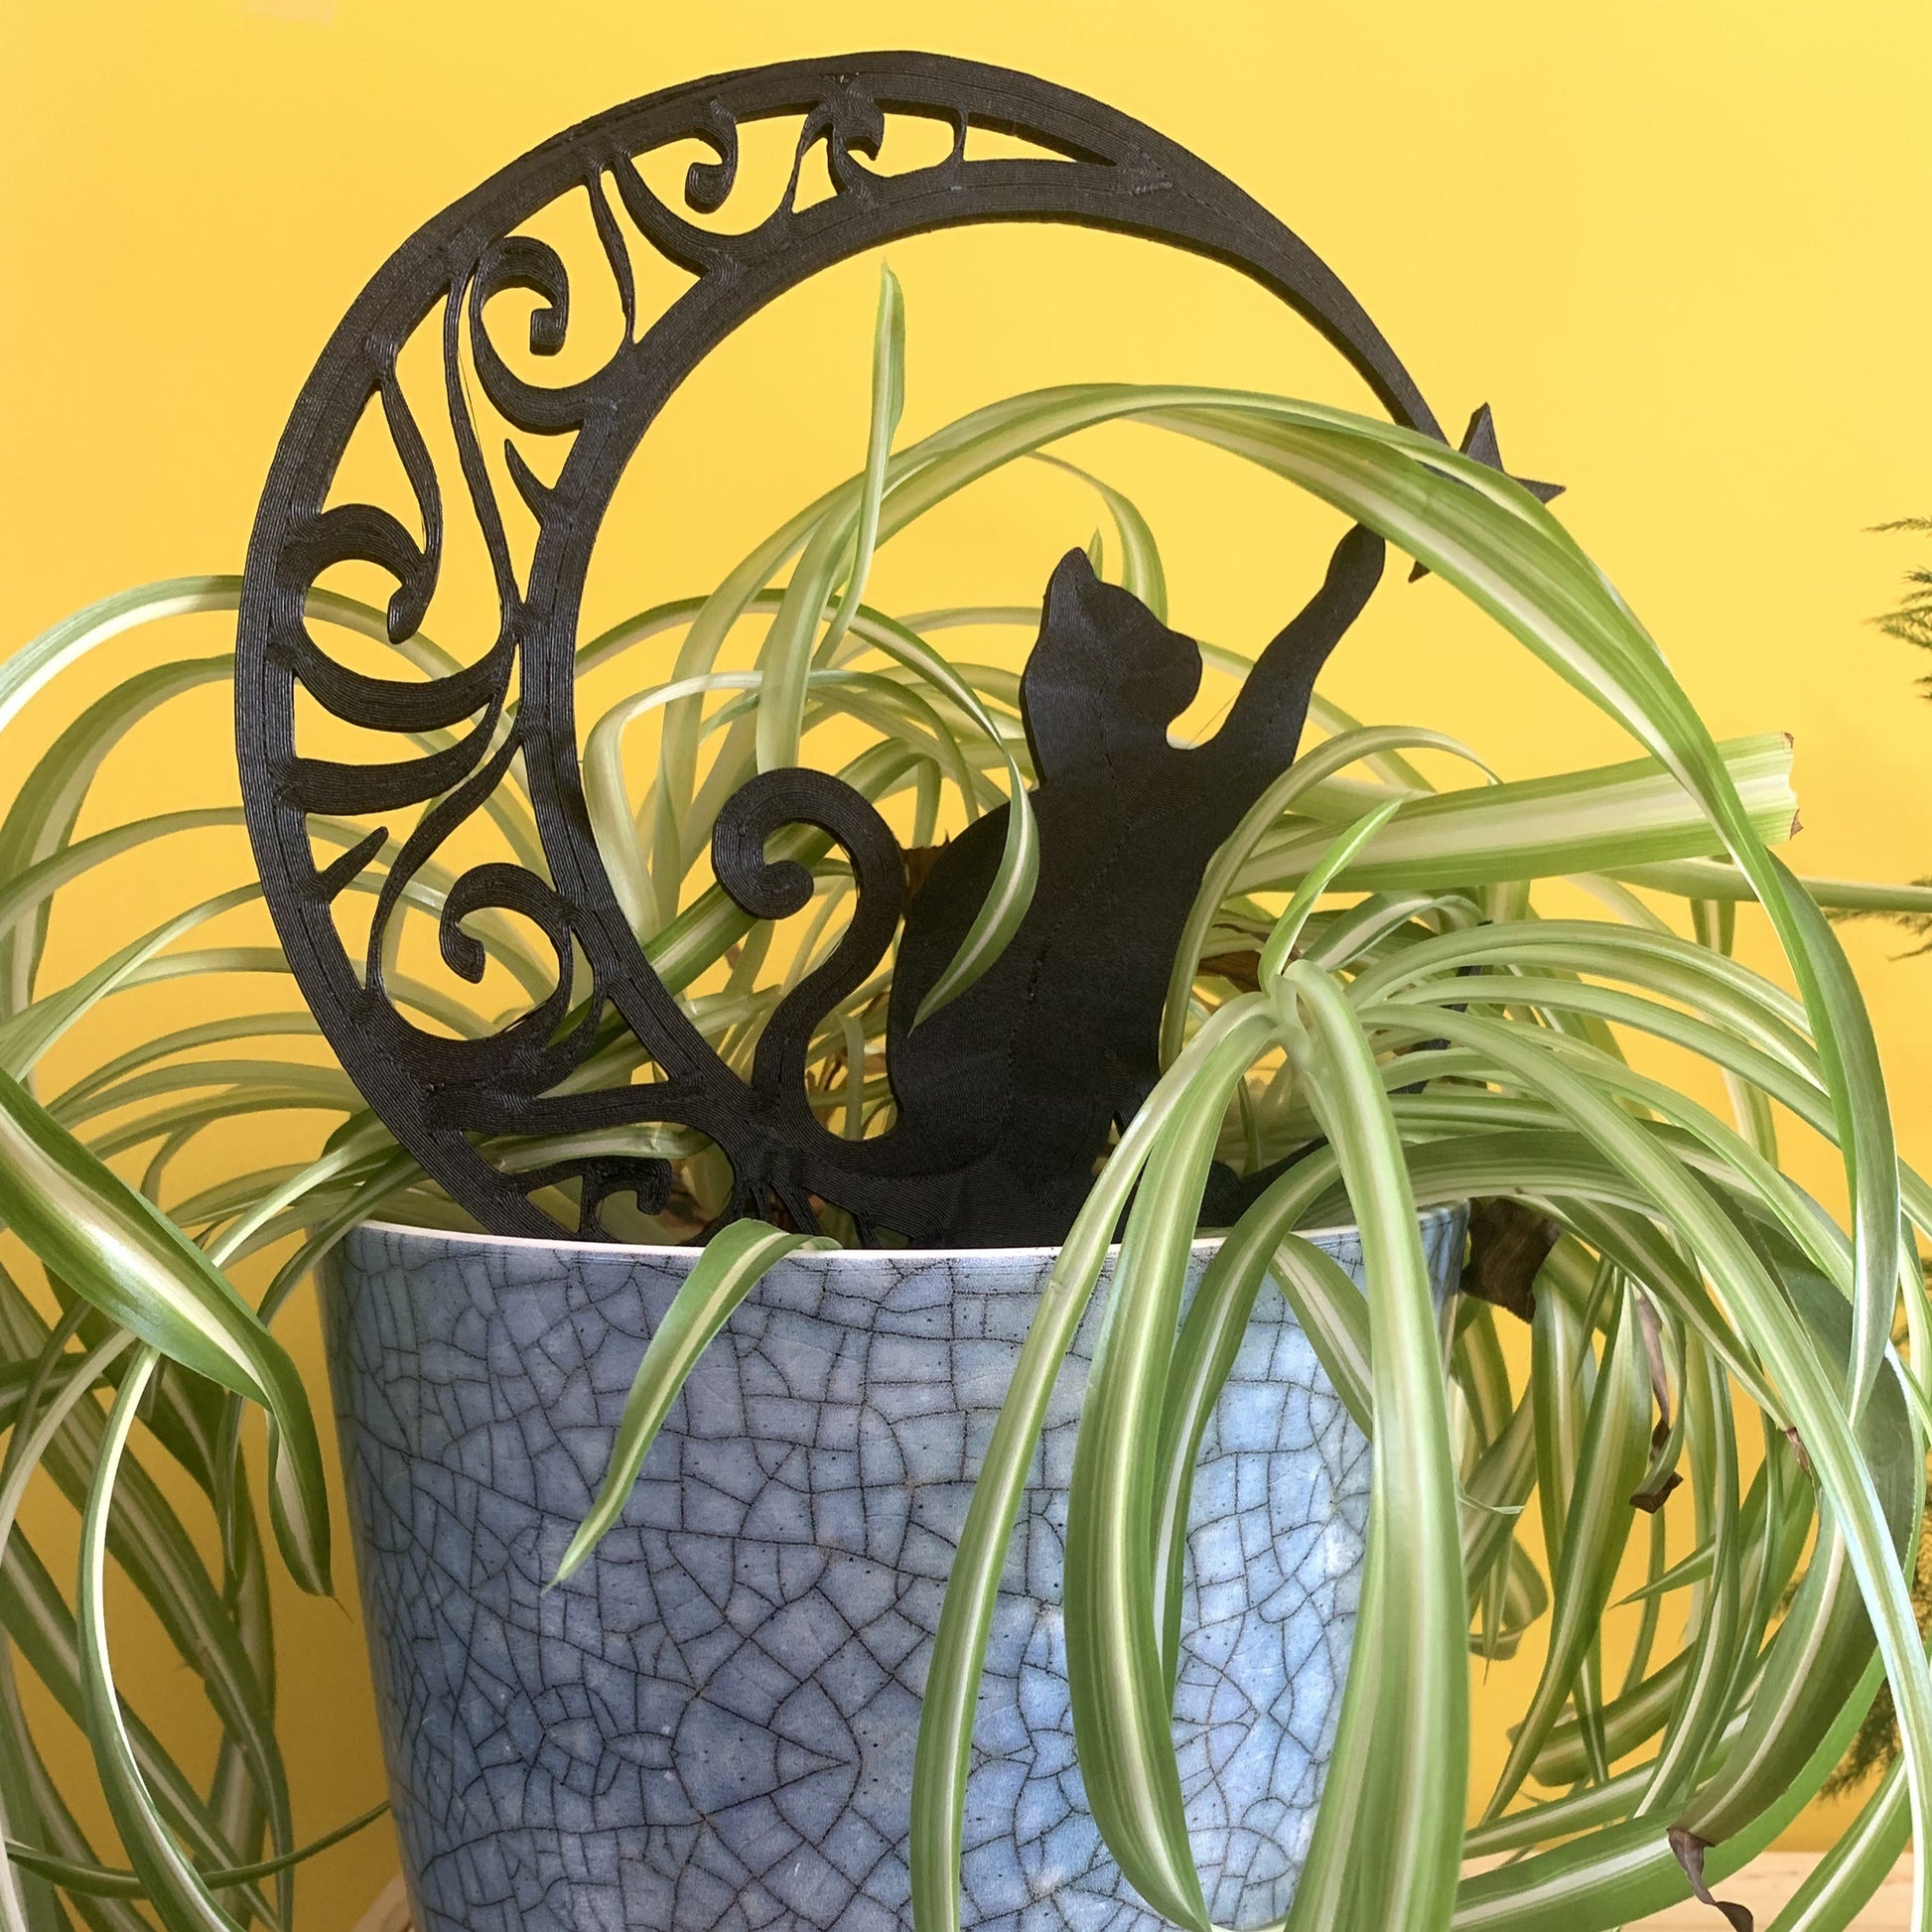 Black cat and moon trellis with spider plant